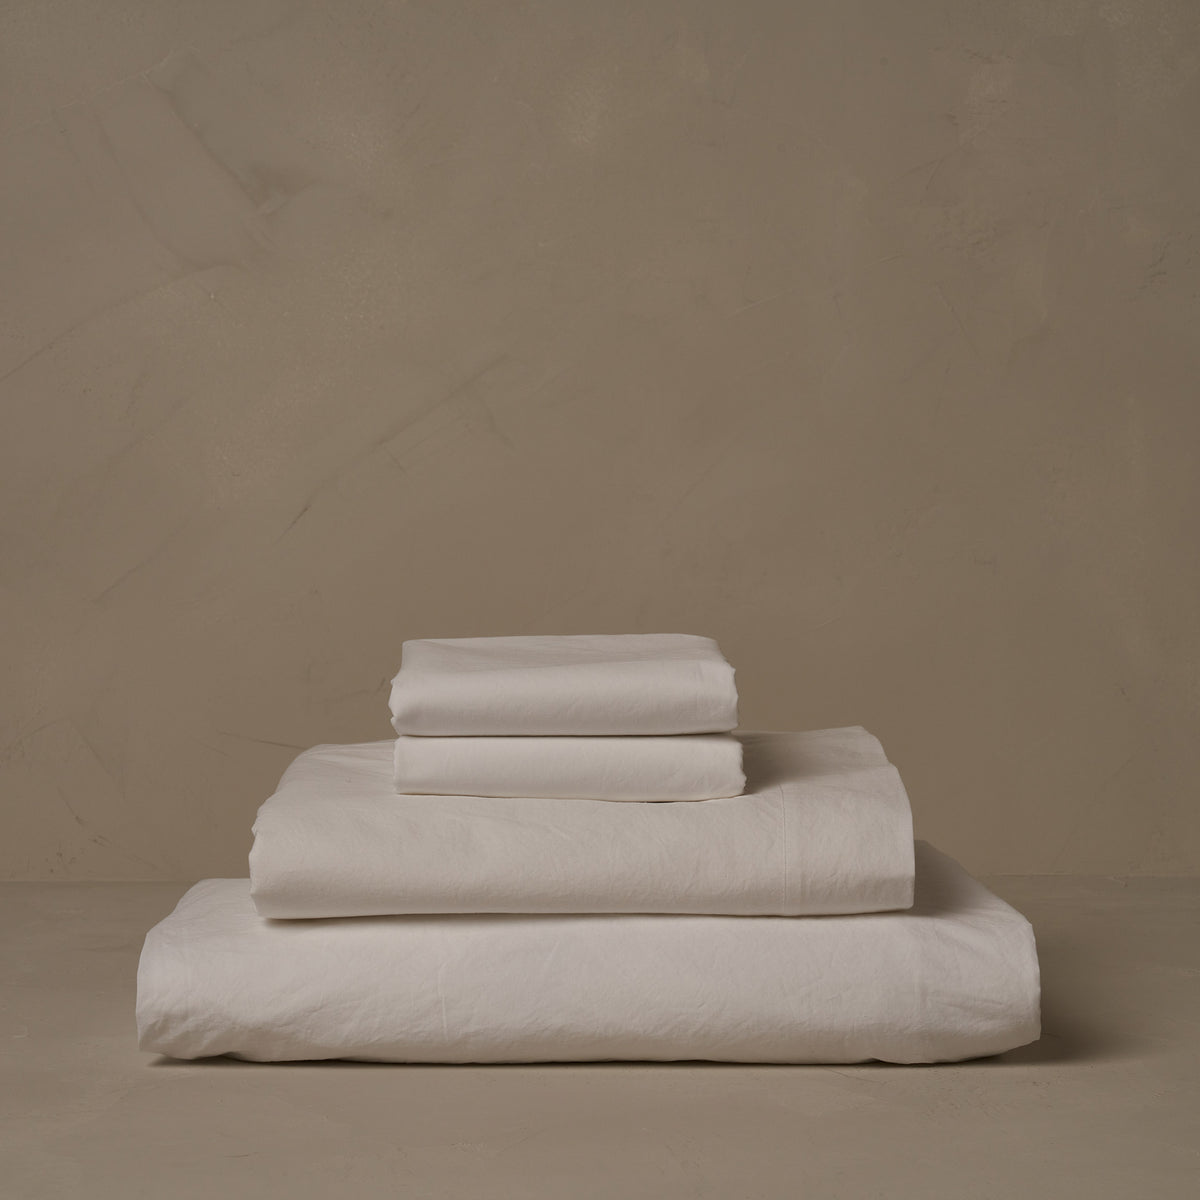 A stack of crisp and cool LETTO 100% Organic Cotton Percale sheets in white, made in Italy. The sheet set includes a fitted sheet, a flat sheet, and a pair of pillowcases. data-image-id=